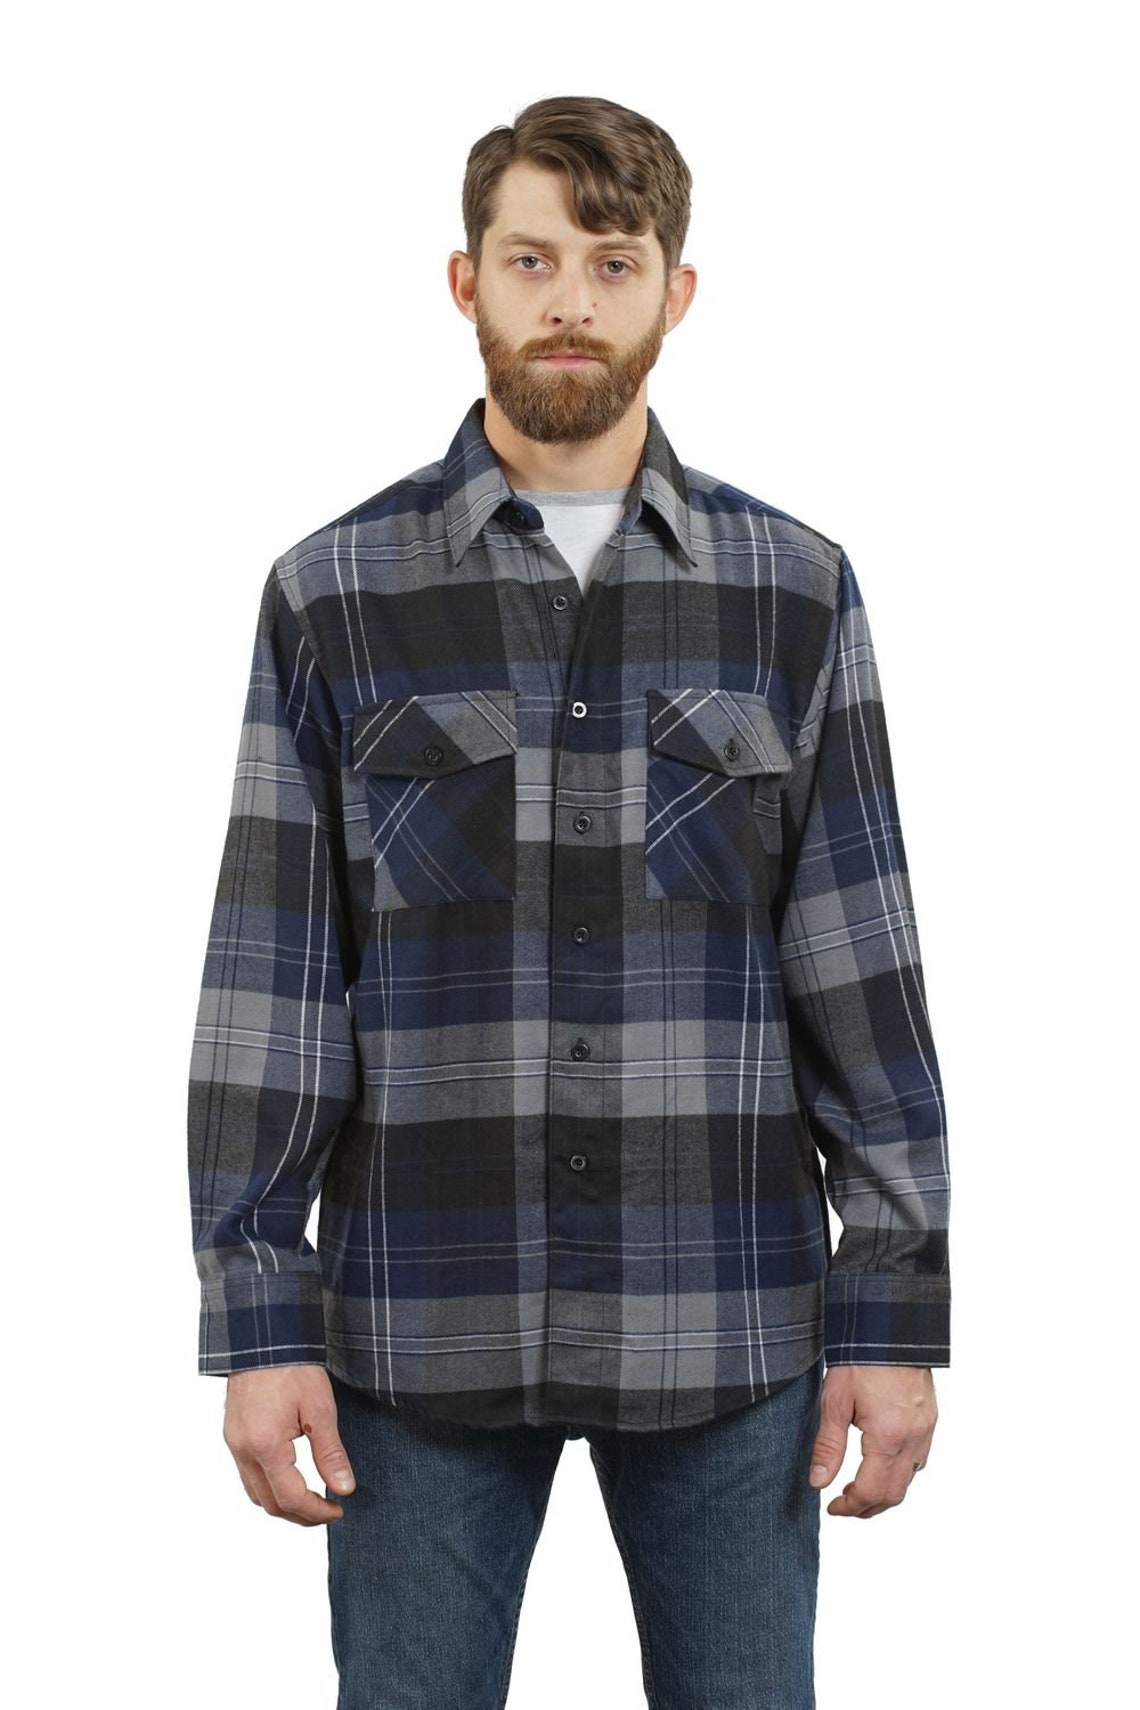 YAGO Men's Casual Plaid Flannel Long Sleeve Button Down | Etsy